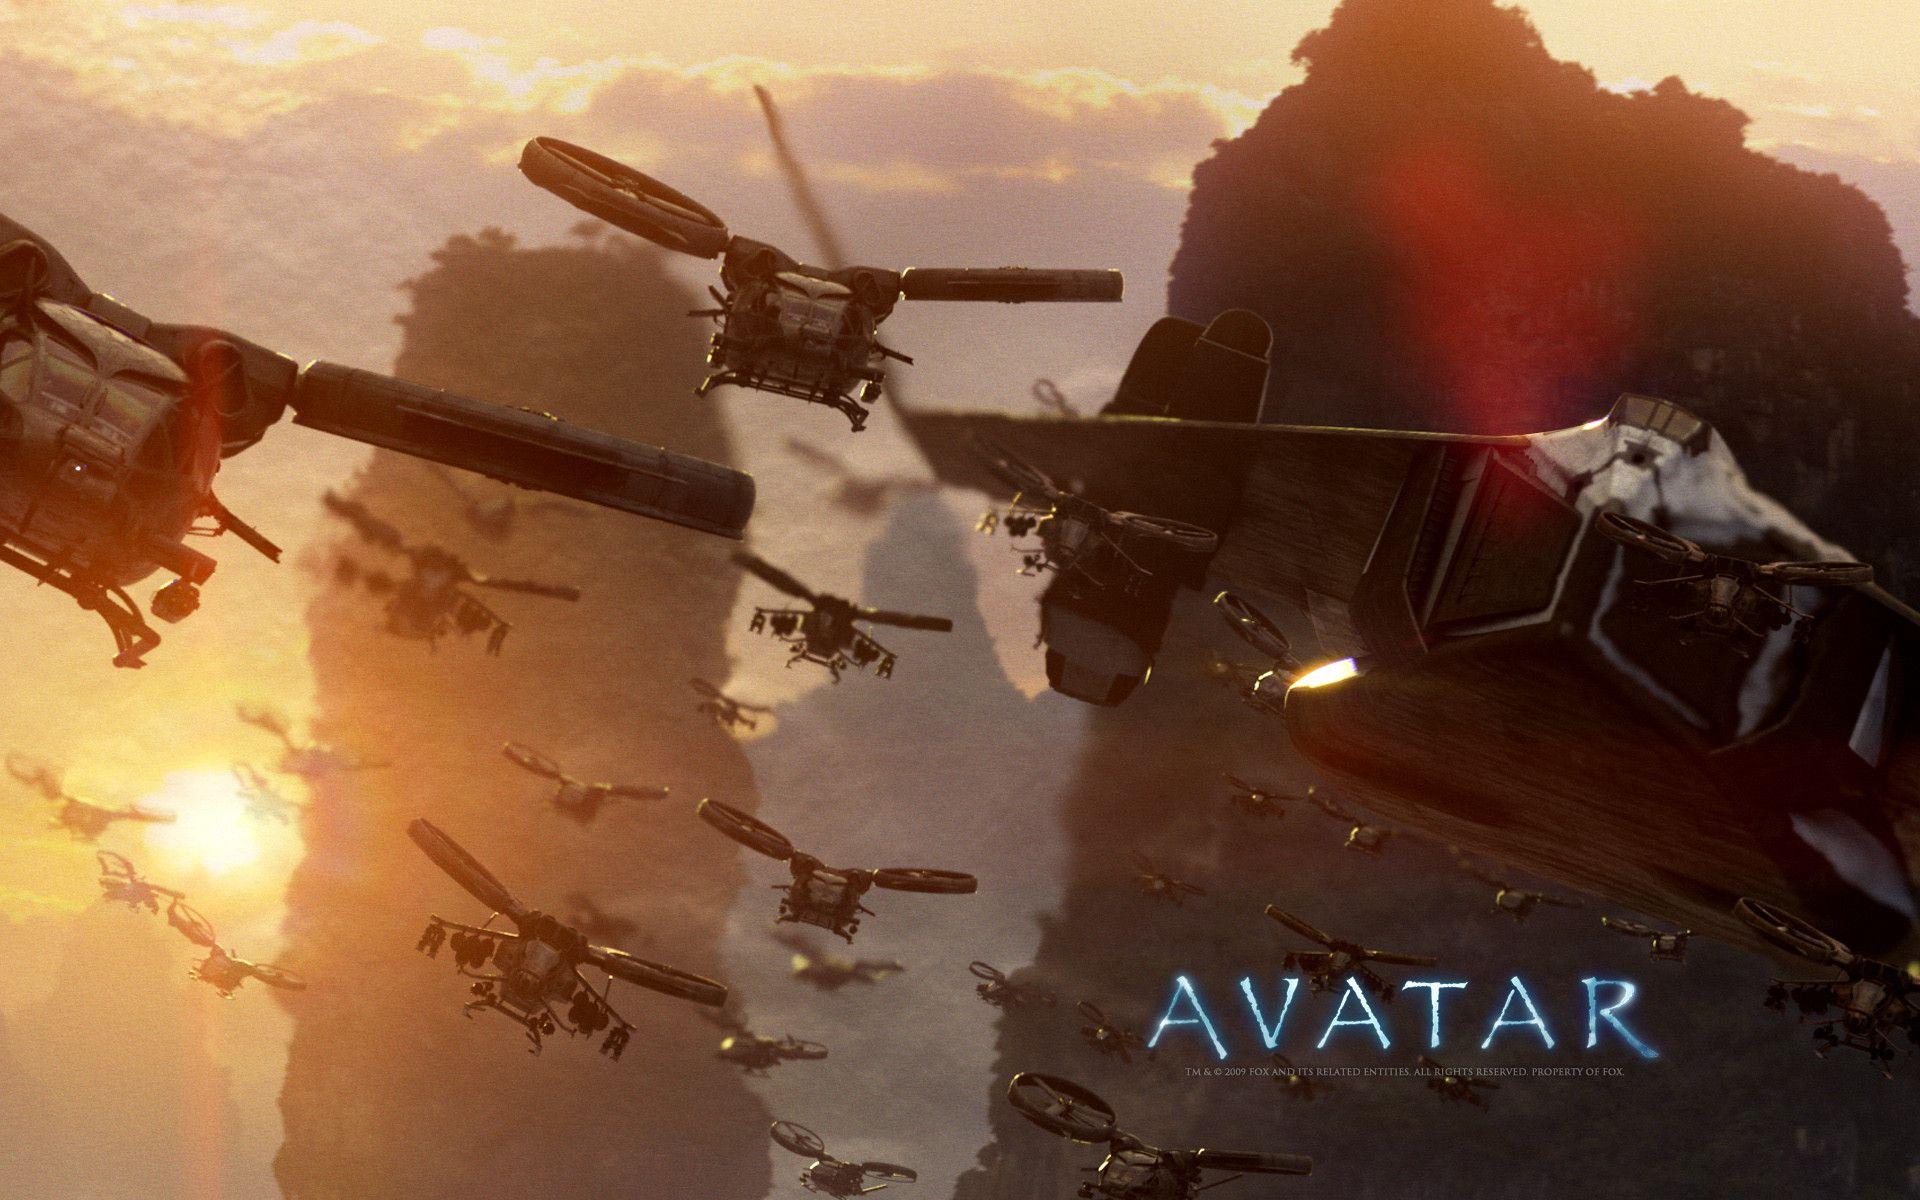 Amazing HD Wallpaper of the 3D epic movie Avatar. Leawo Official